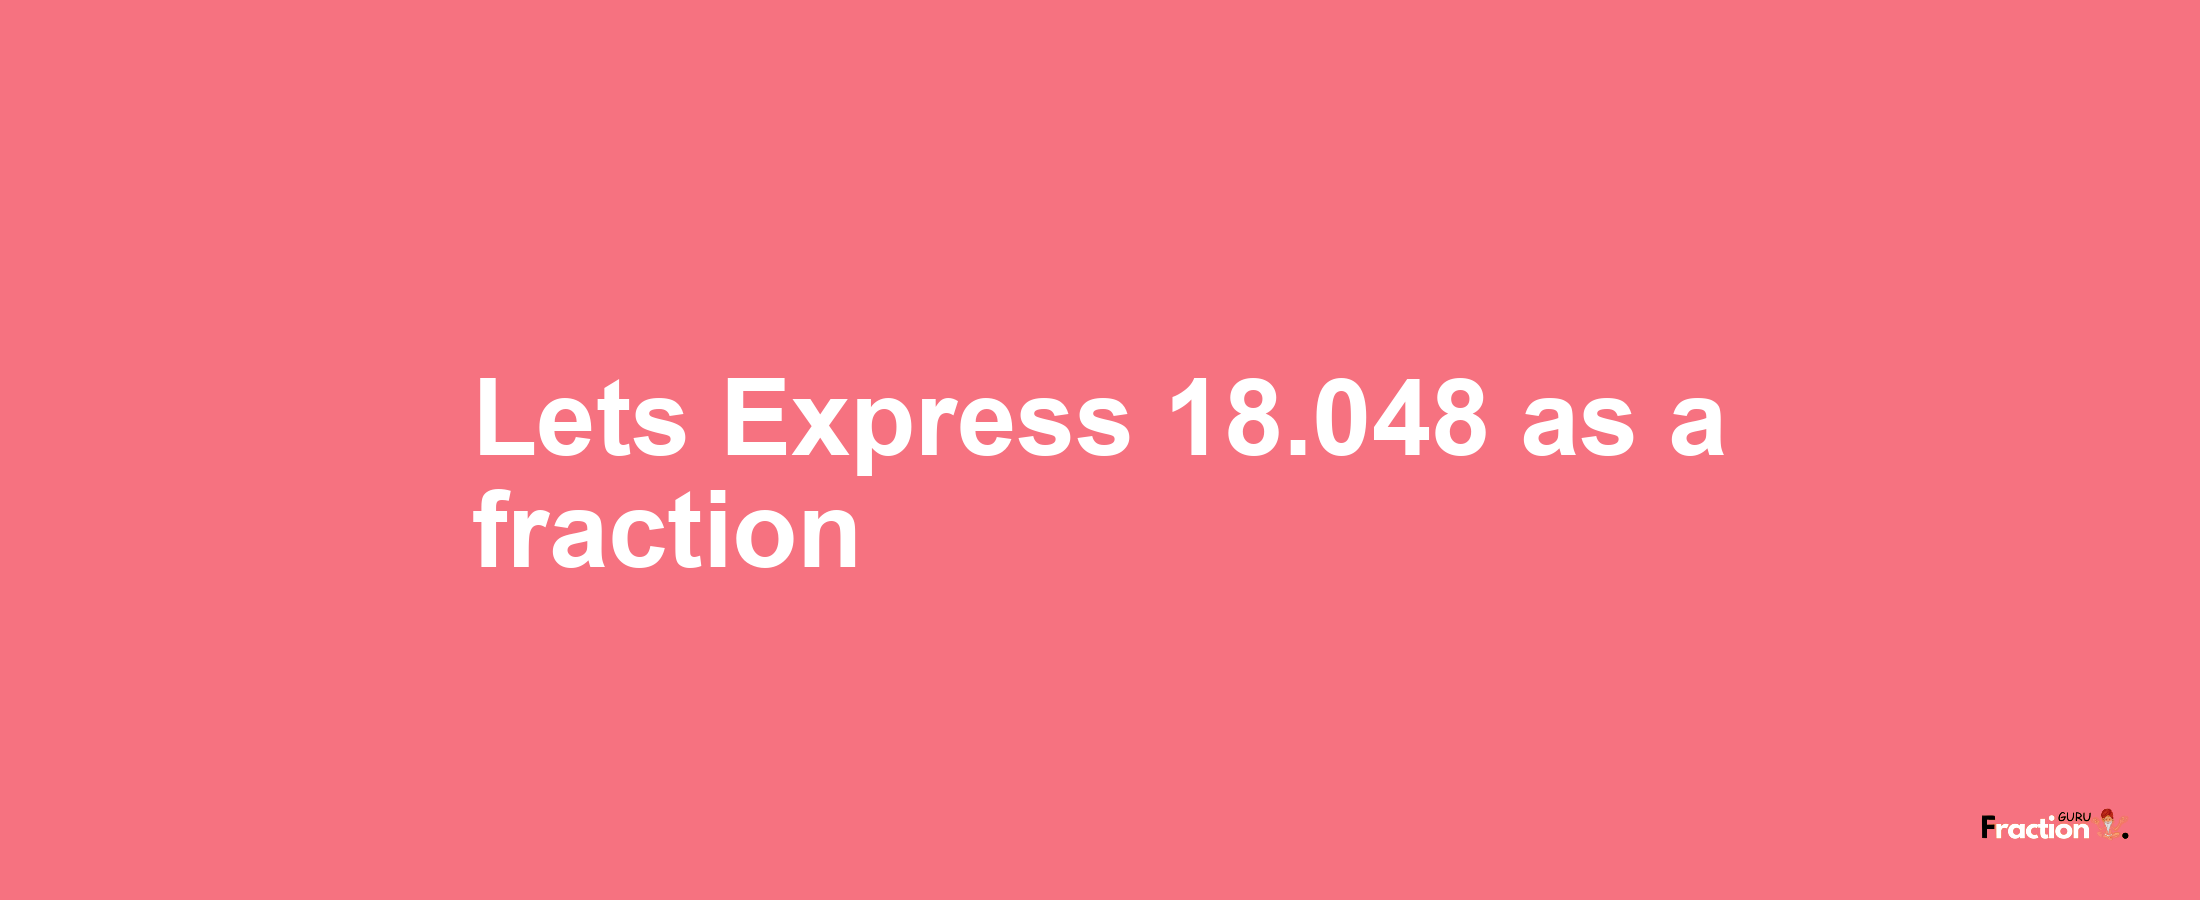 Lets Express 18.048 as afraction